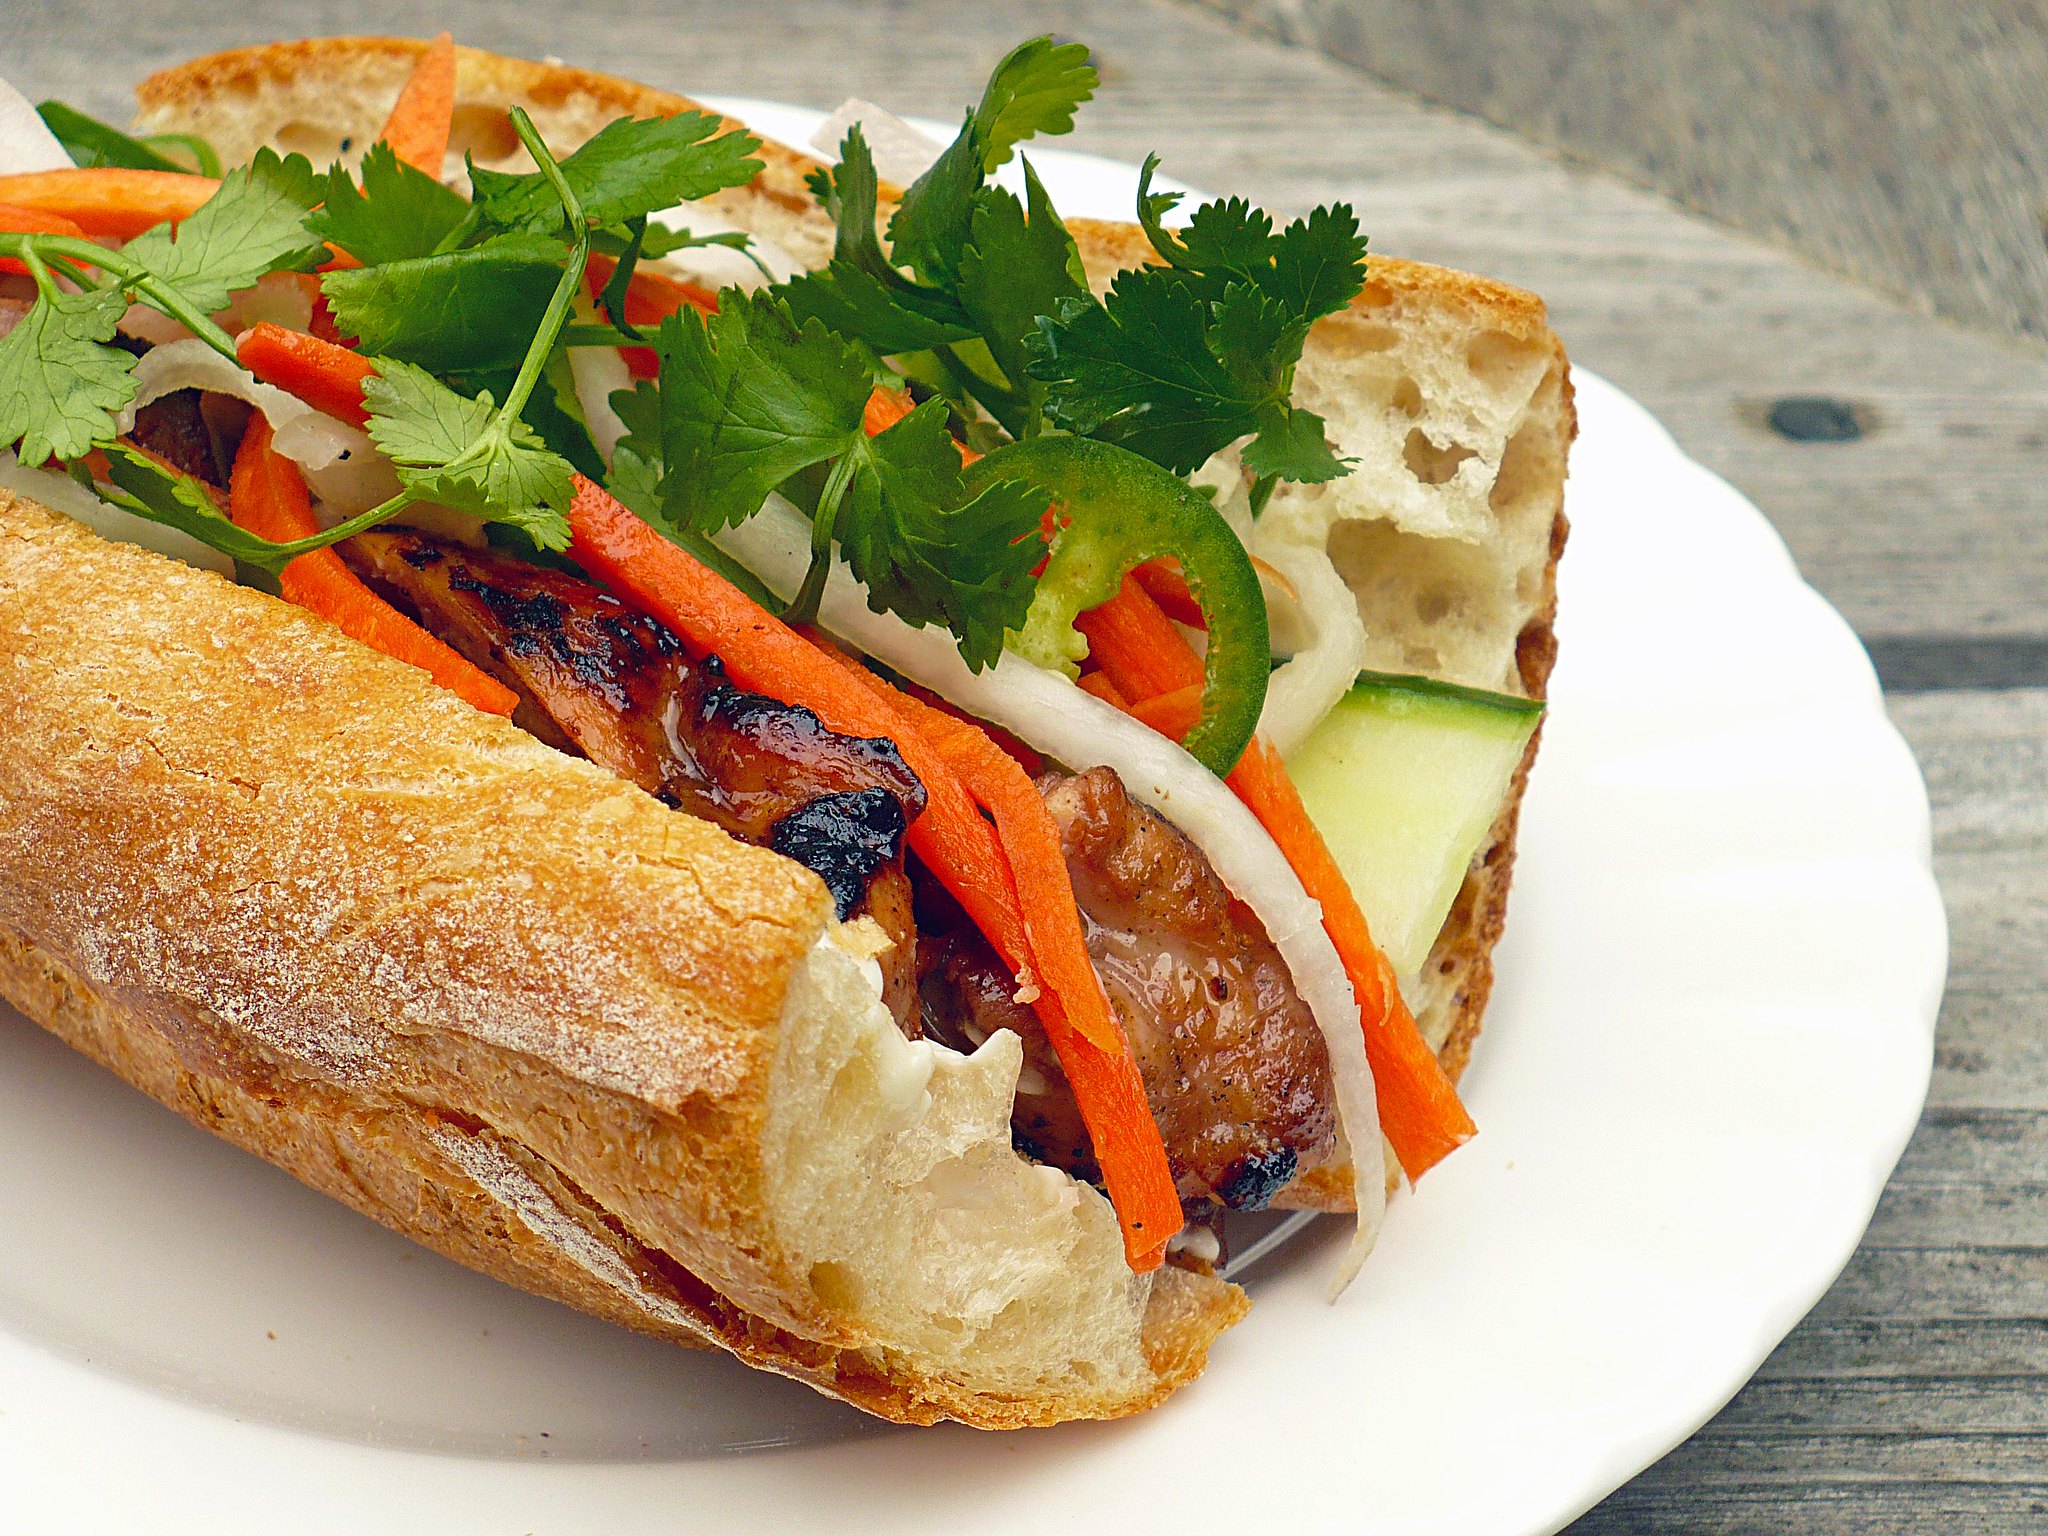 Vietnamese most popular street food is Banh Mi with roasted pork filling with Vietnamese coriander and herbs